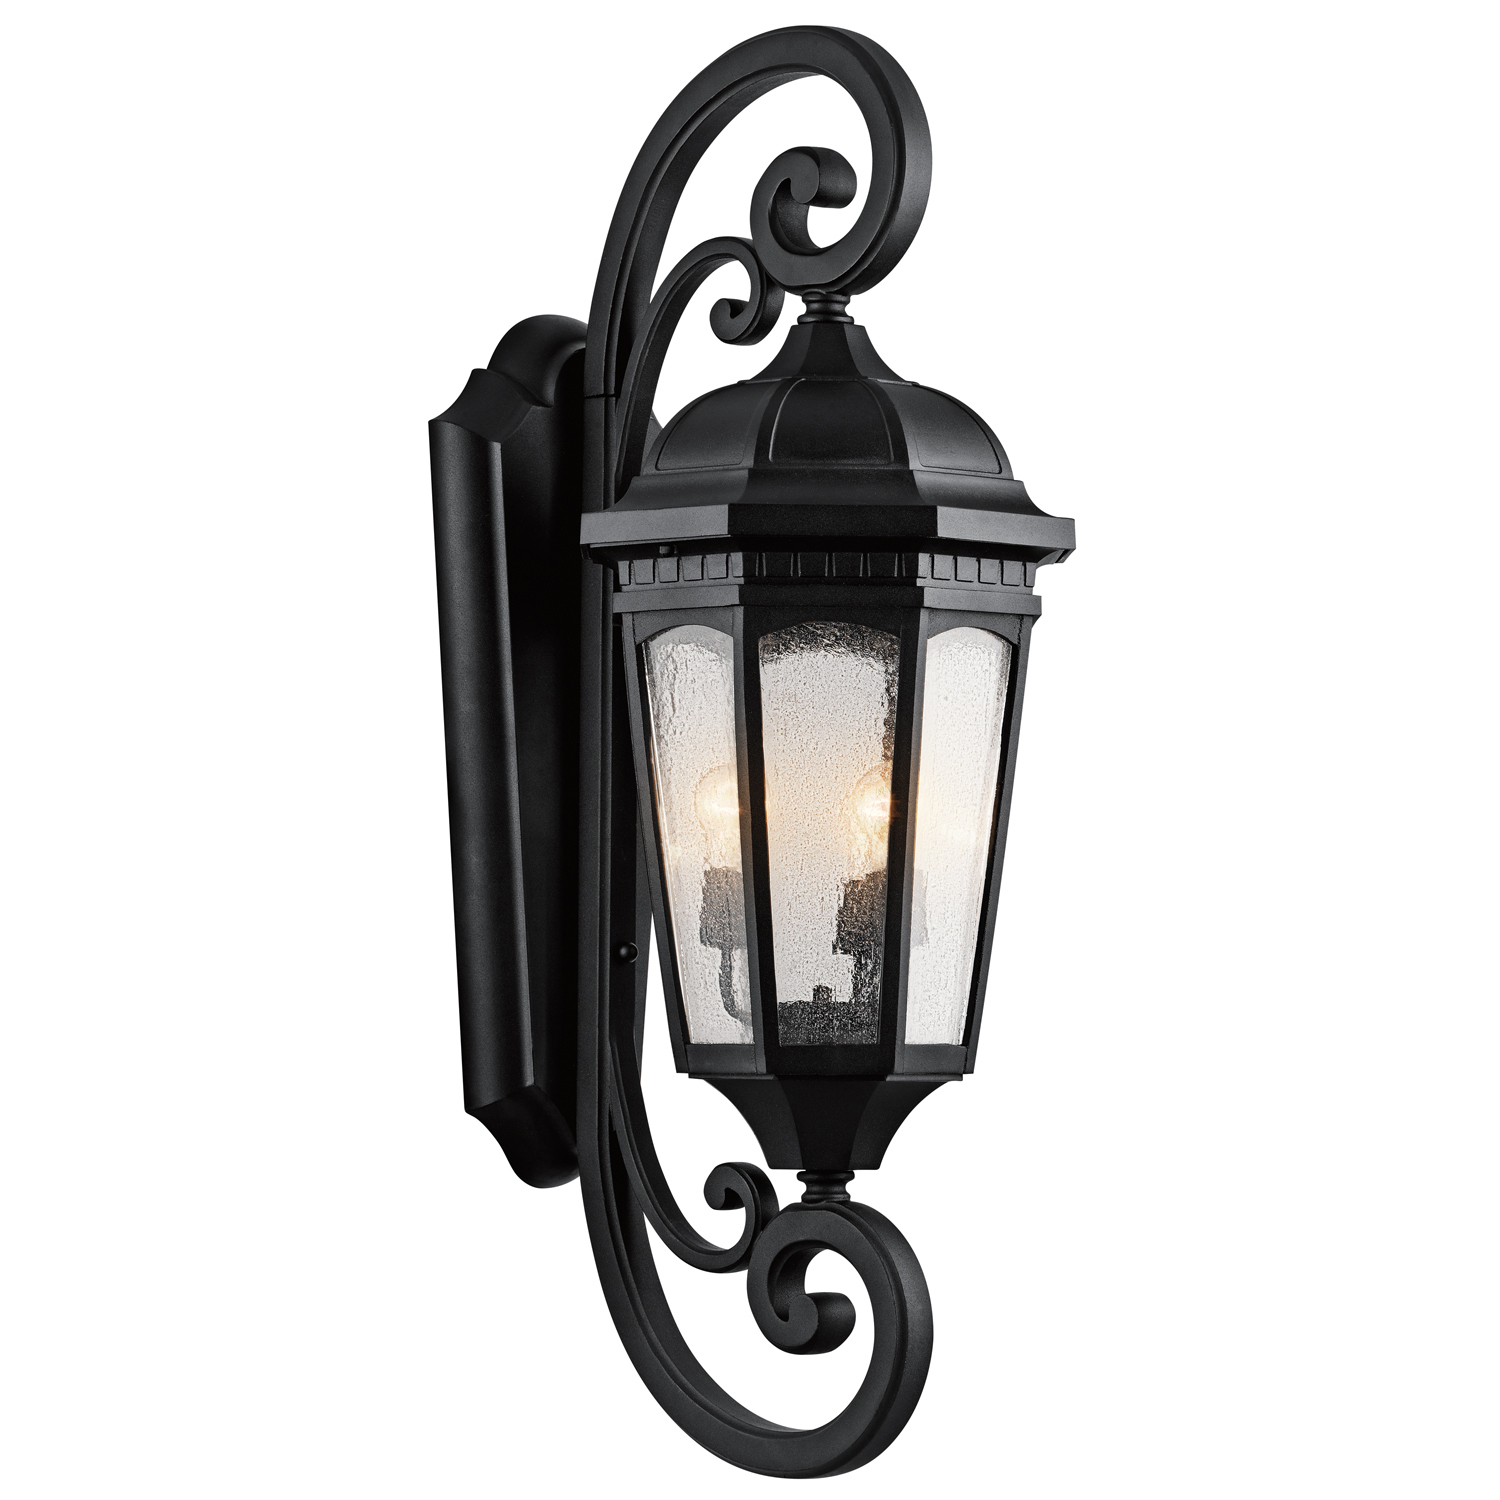 Uncluttered and traditional, this 3 light outdoor wall lantern from the Courtyard(TM) collection adds the warmth of a secluded terrace to any patio or porch. Featuring a Textured Black finish and Clear Seedy Glass, this design will elevate and enhance any space.